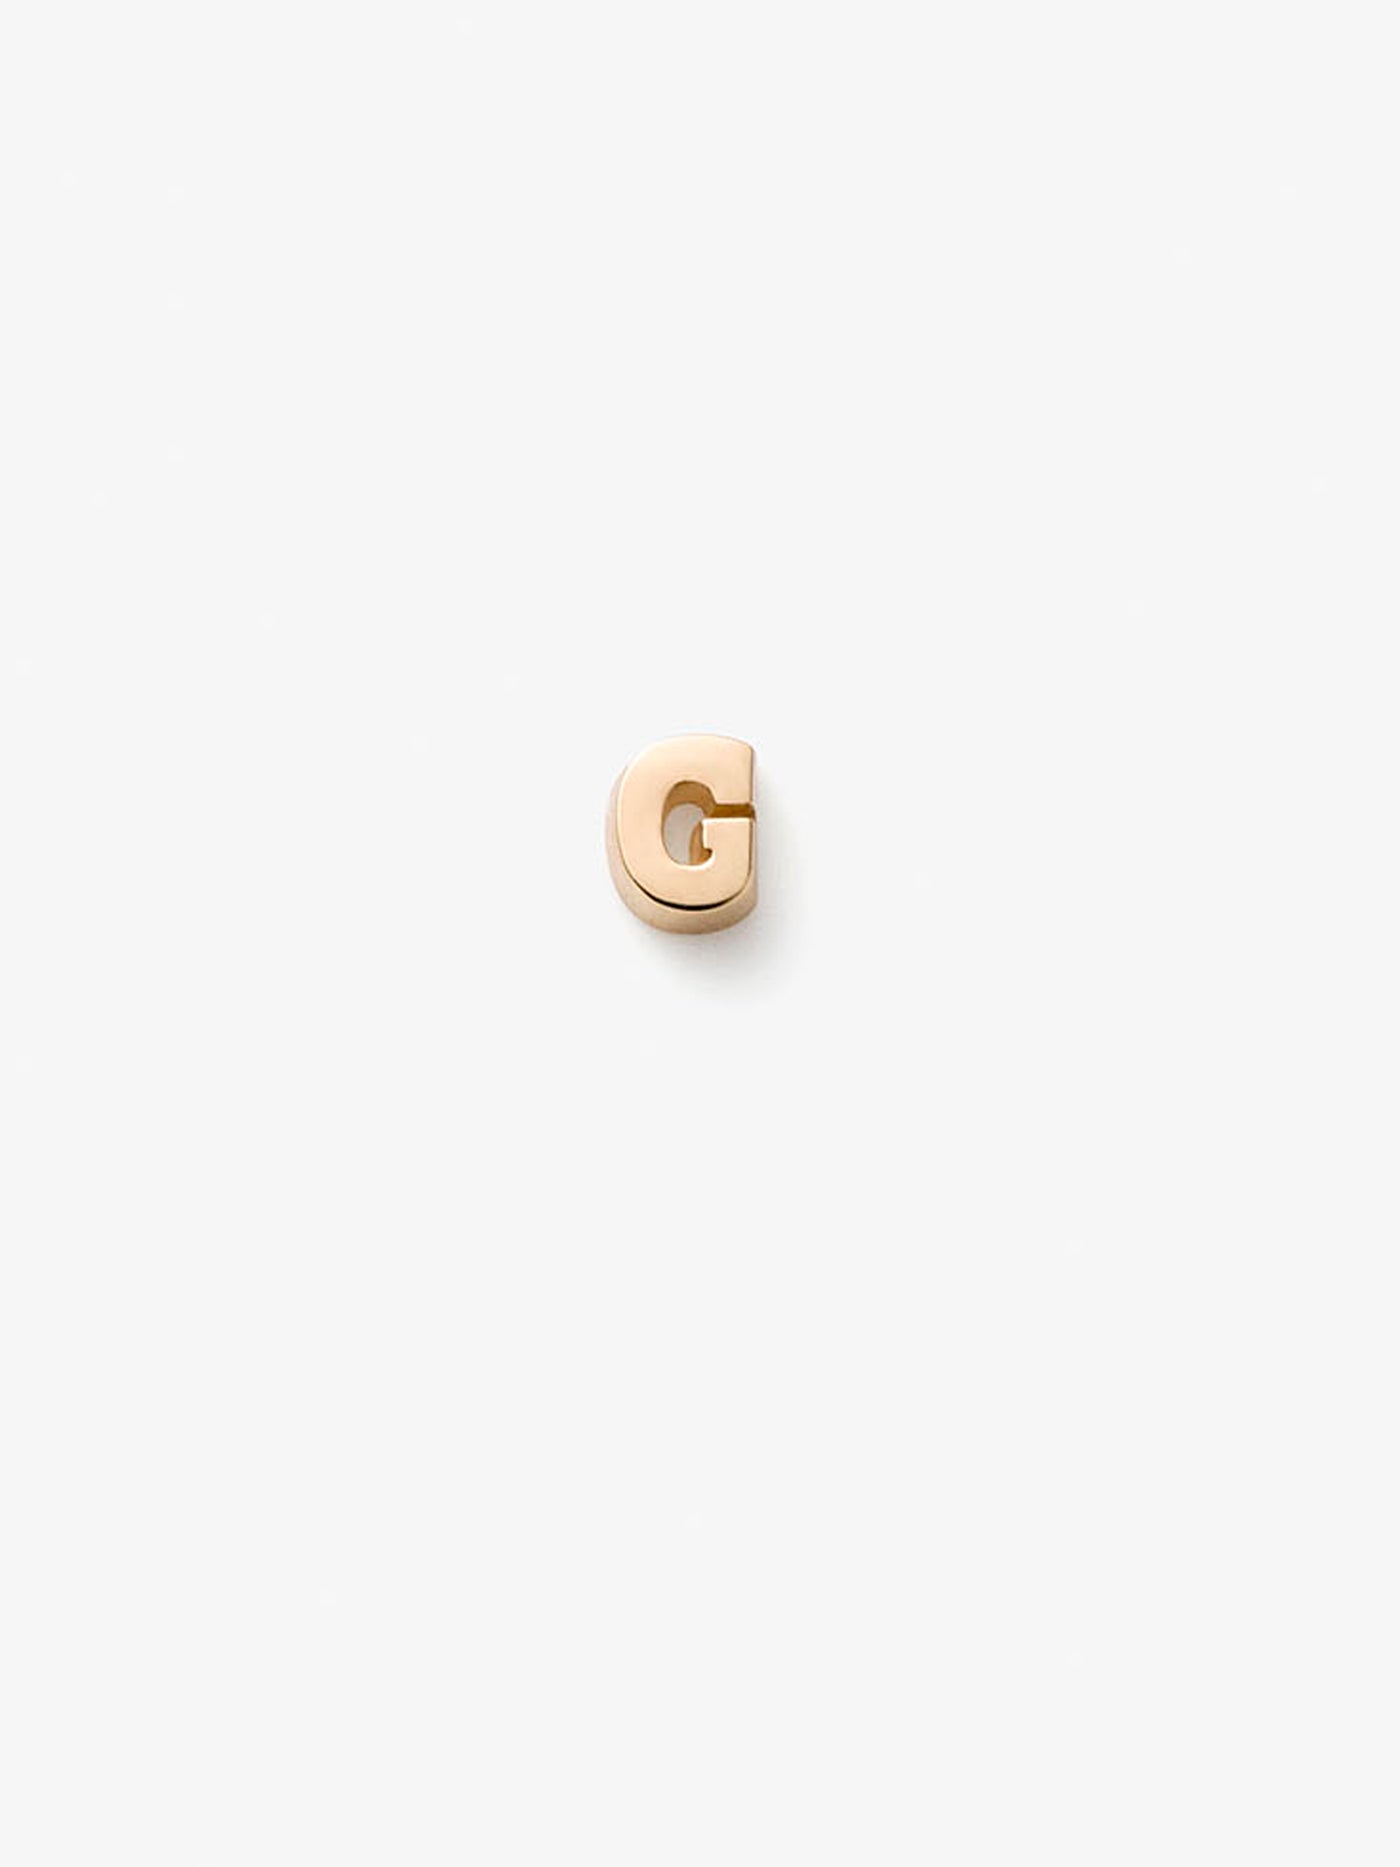 One Letter G in 18k Gold